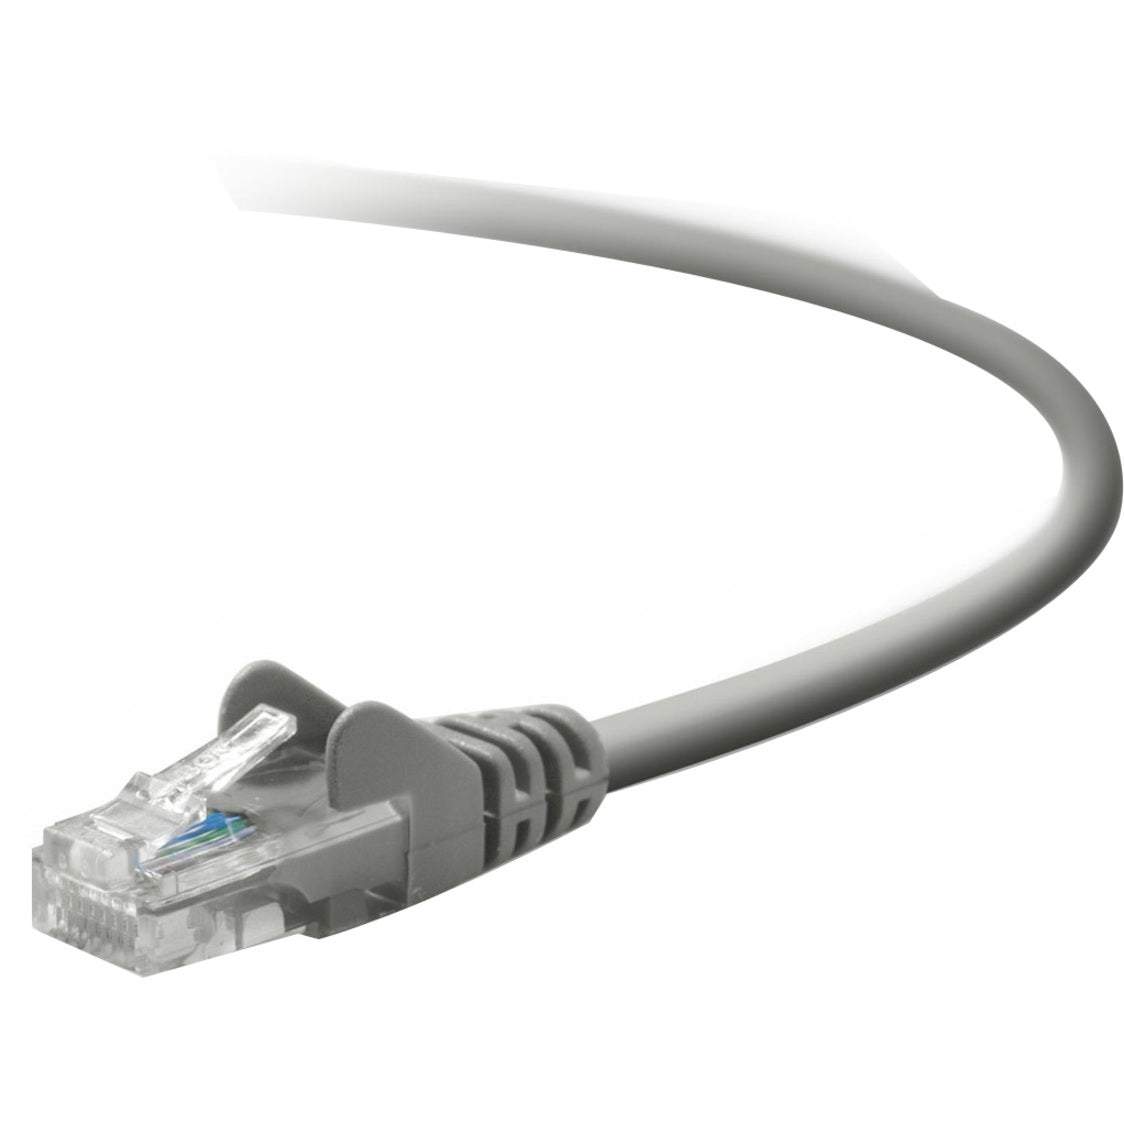 Belkin A3L791-03 Cat5e Network Cable, 3ft - Gray